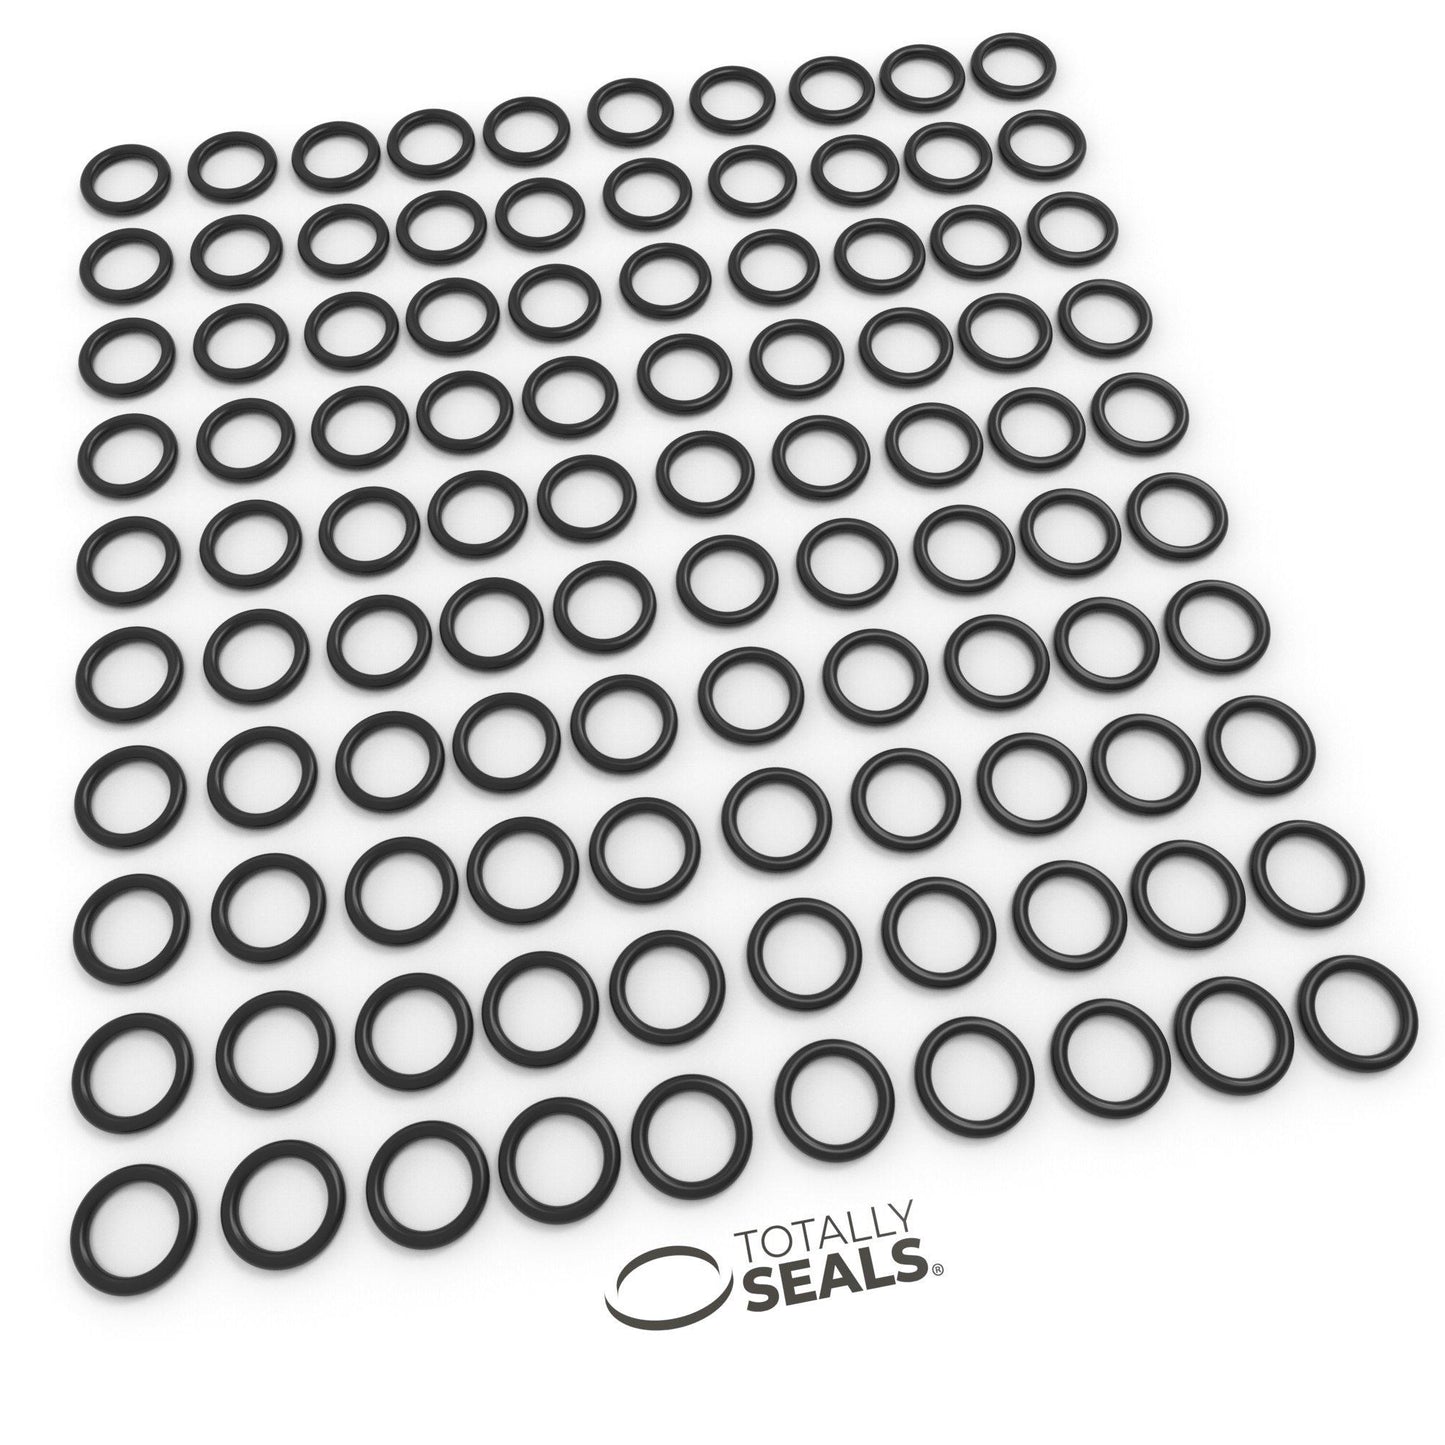 24mm x 1.5mm (27mm OD) Nitrile O-Rings - Totally Seals®